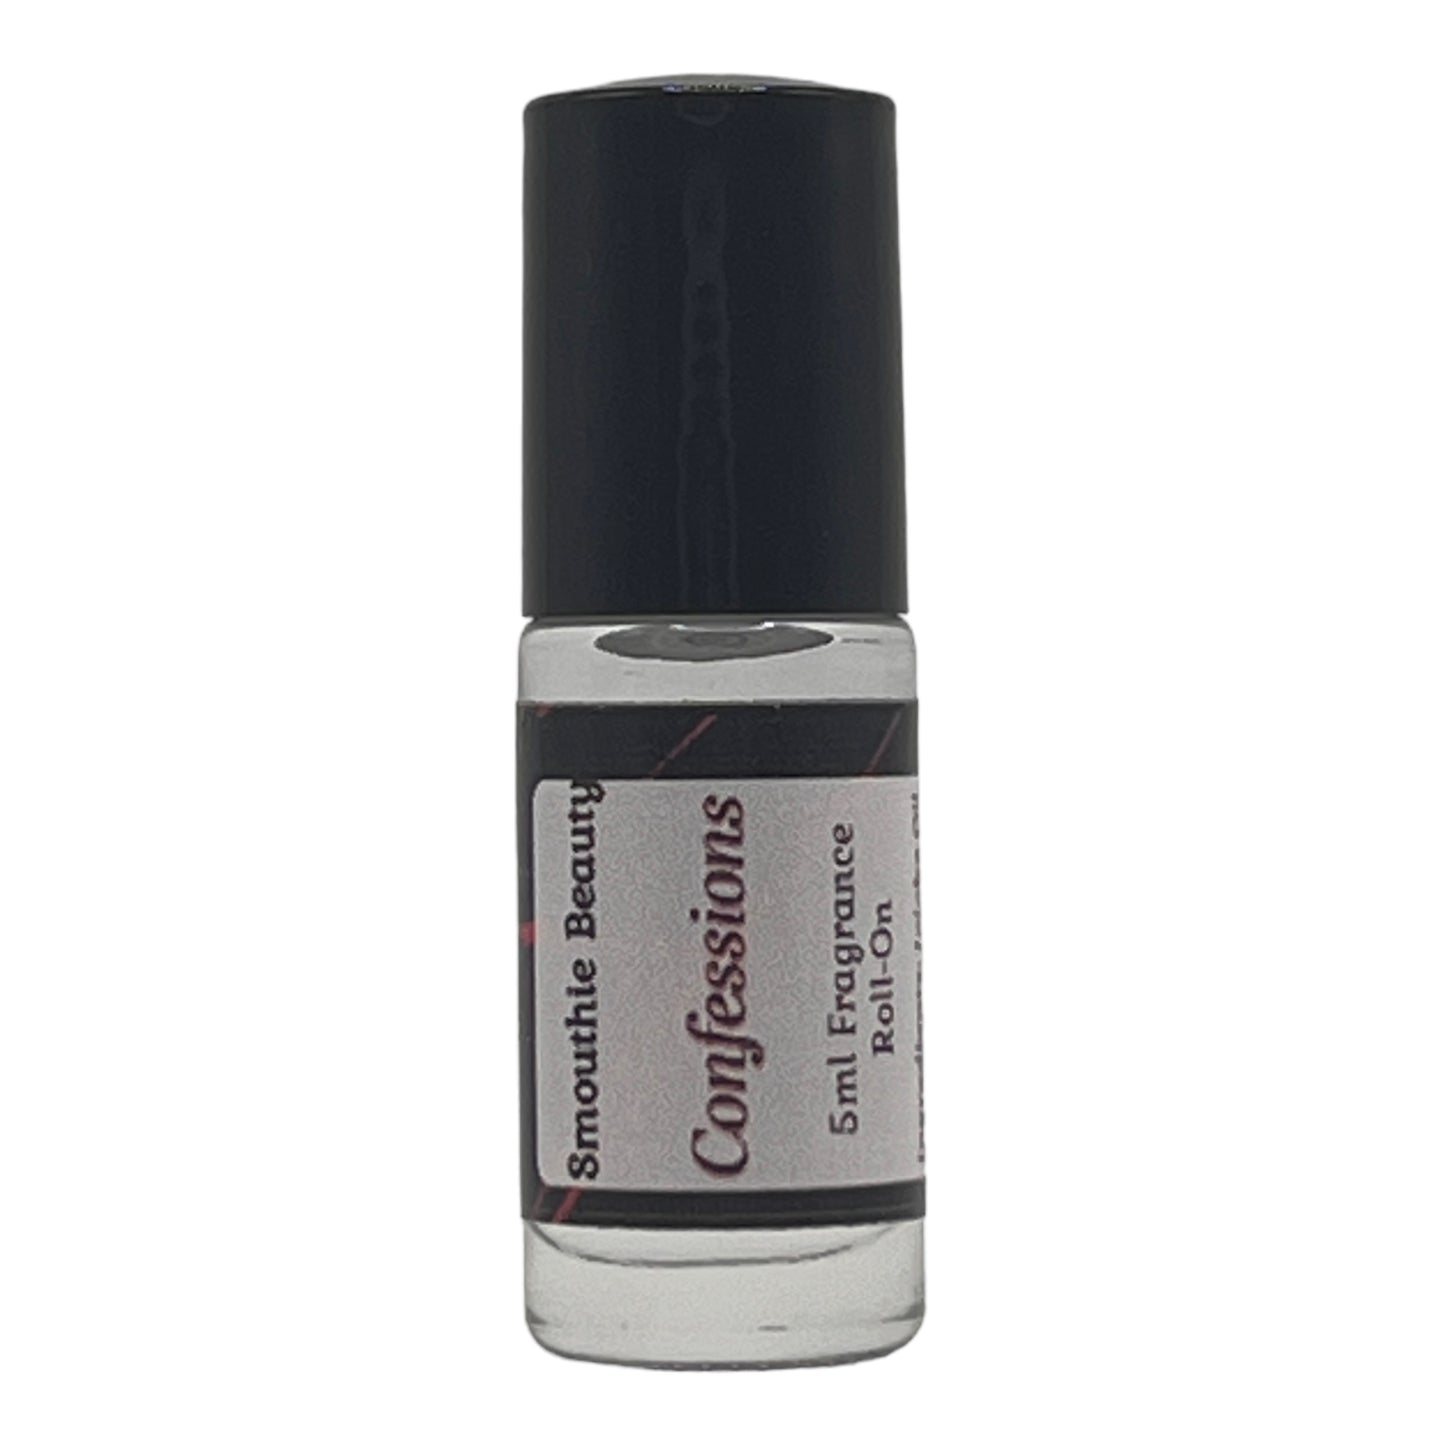 Confessions Cologne Oil Fragrance Roll On